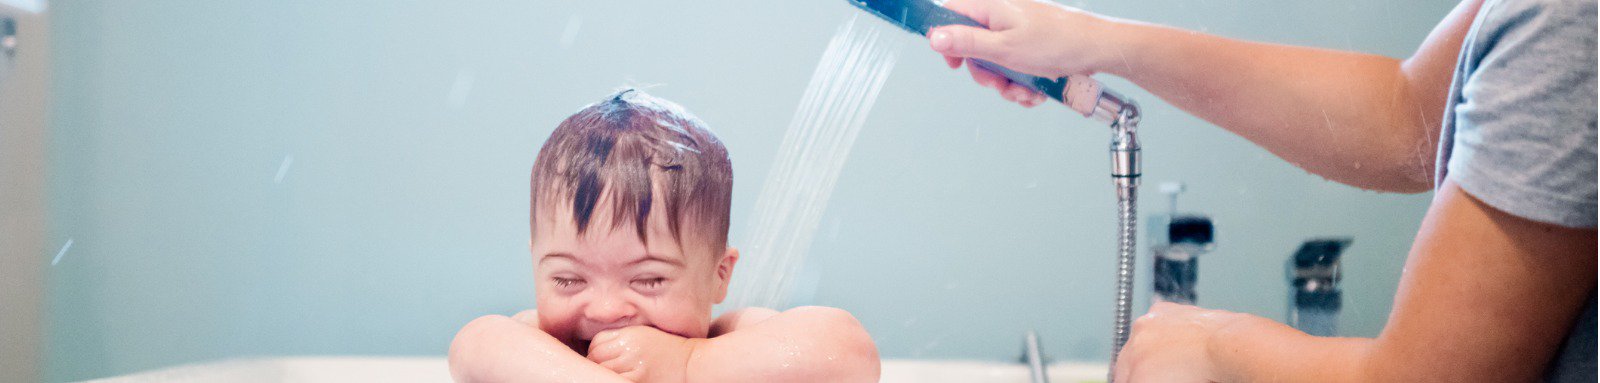 Smiling boy in bath being washed by mother